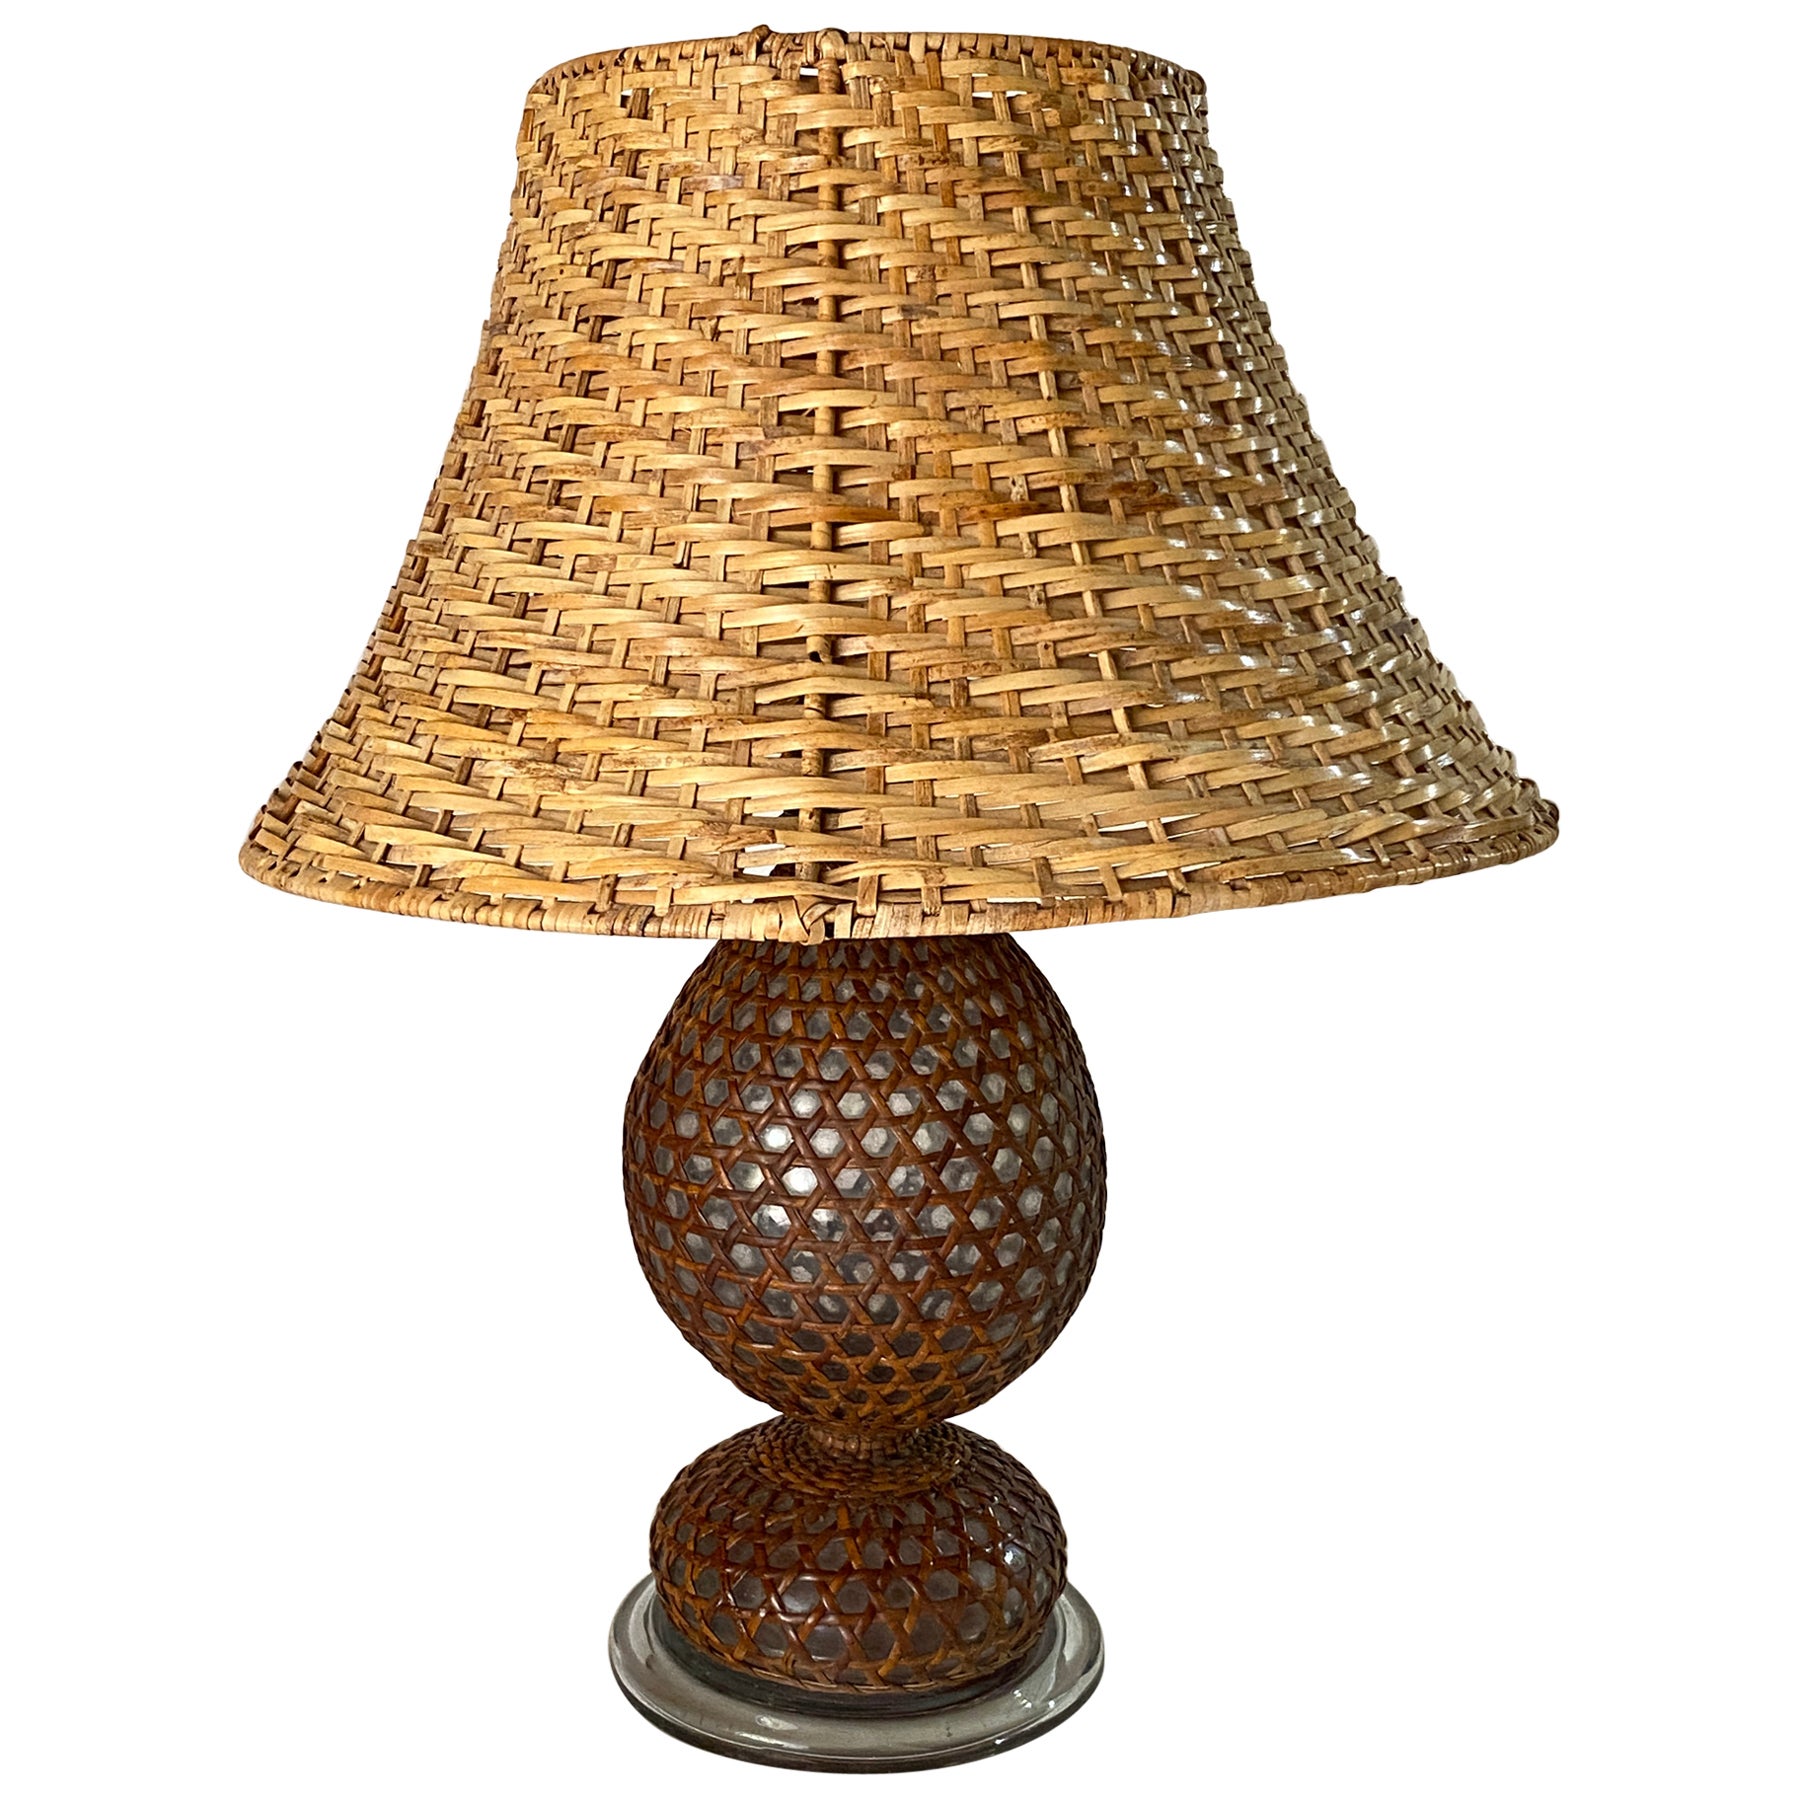 Glass and Rattan Table Lamp, Made in England, Brown Color, Circa 1970 For Sale 1